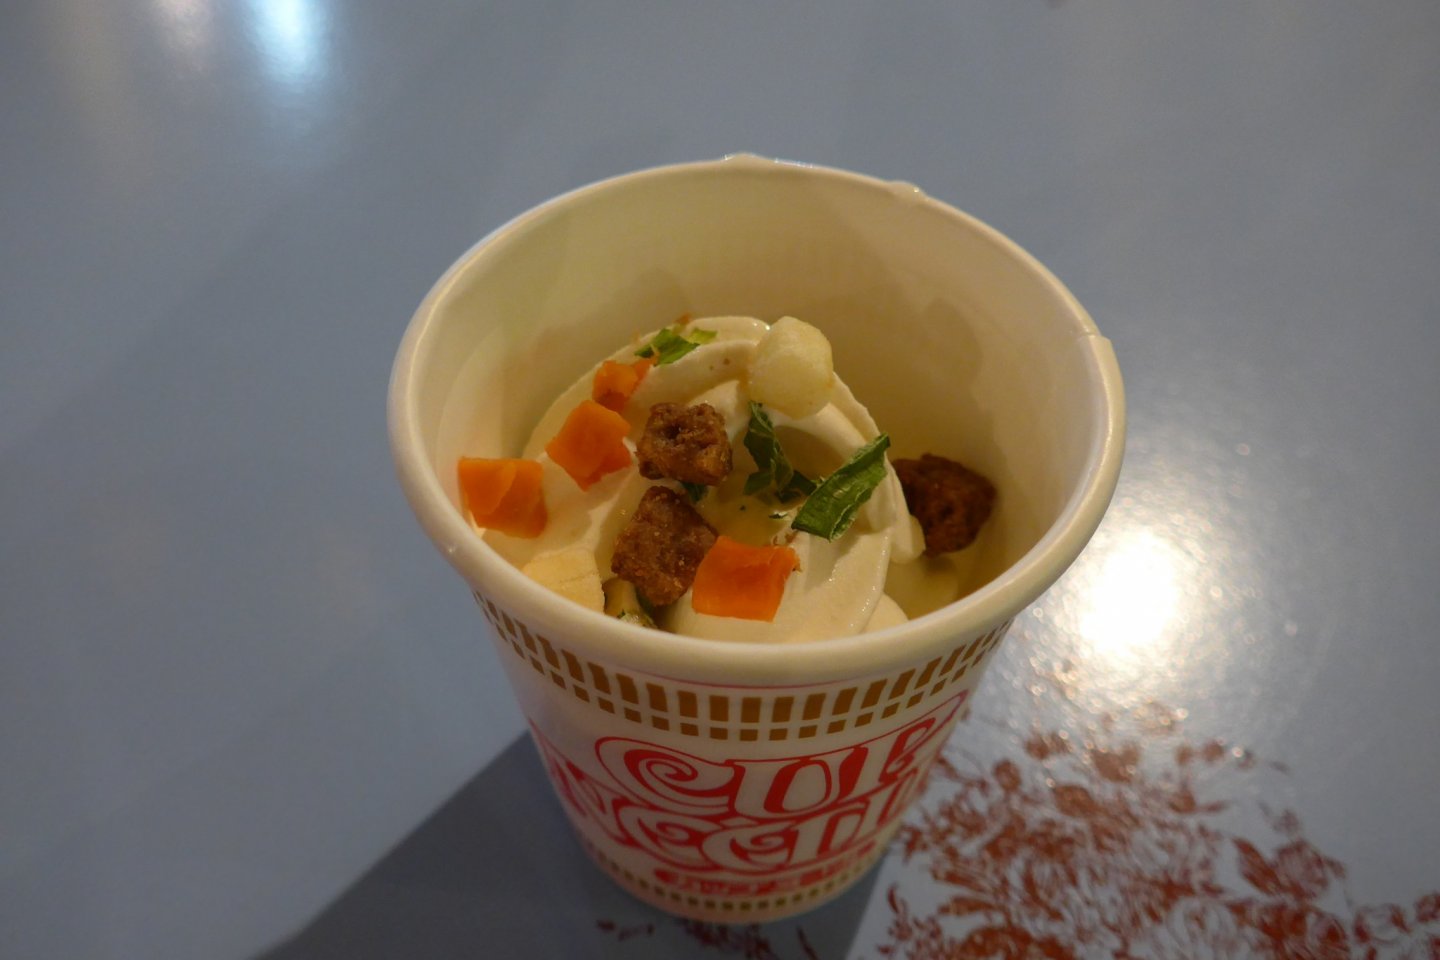 The ramen ice cream came with the ingredients you would usually find in a packet of cup noodles.